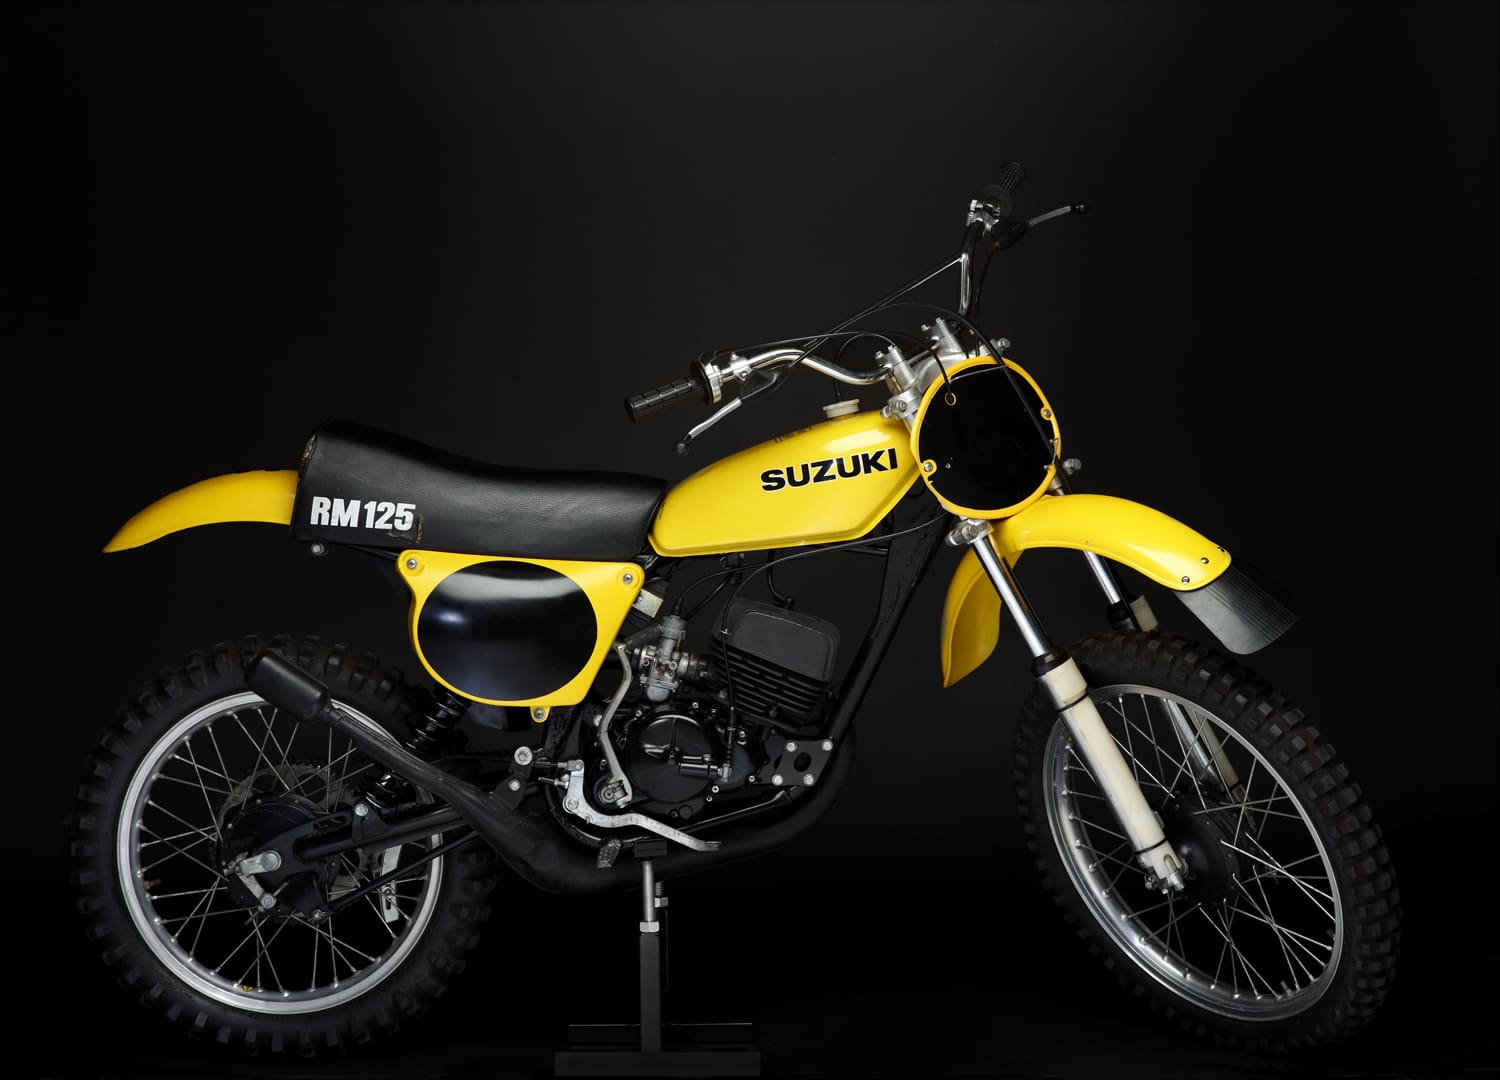 A yellow dirt bike on display against a black background.